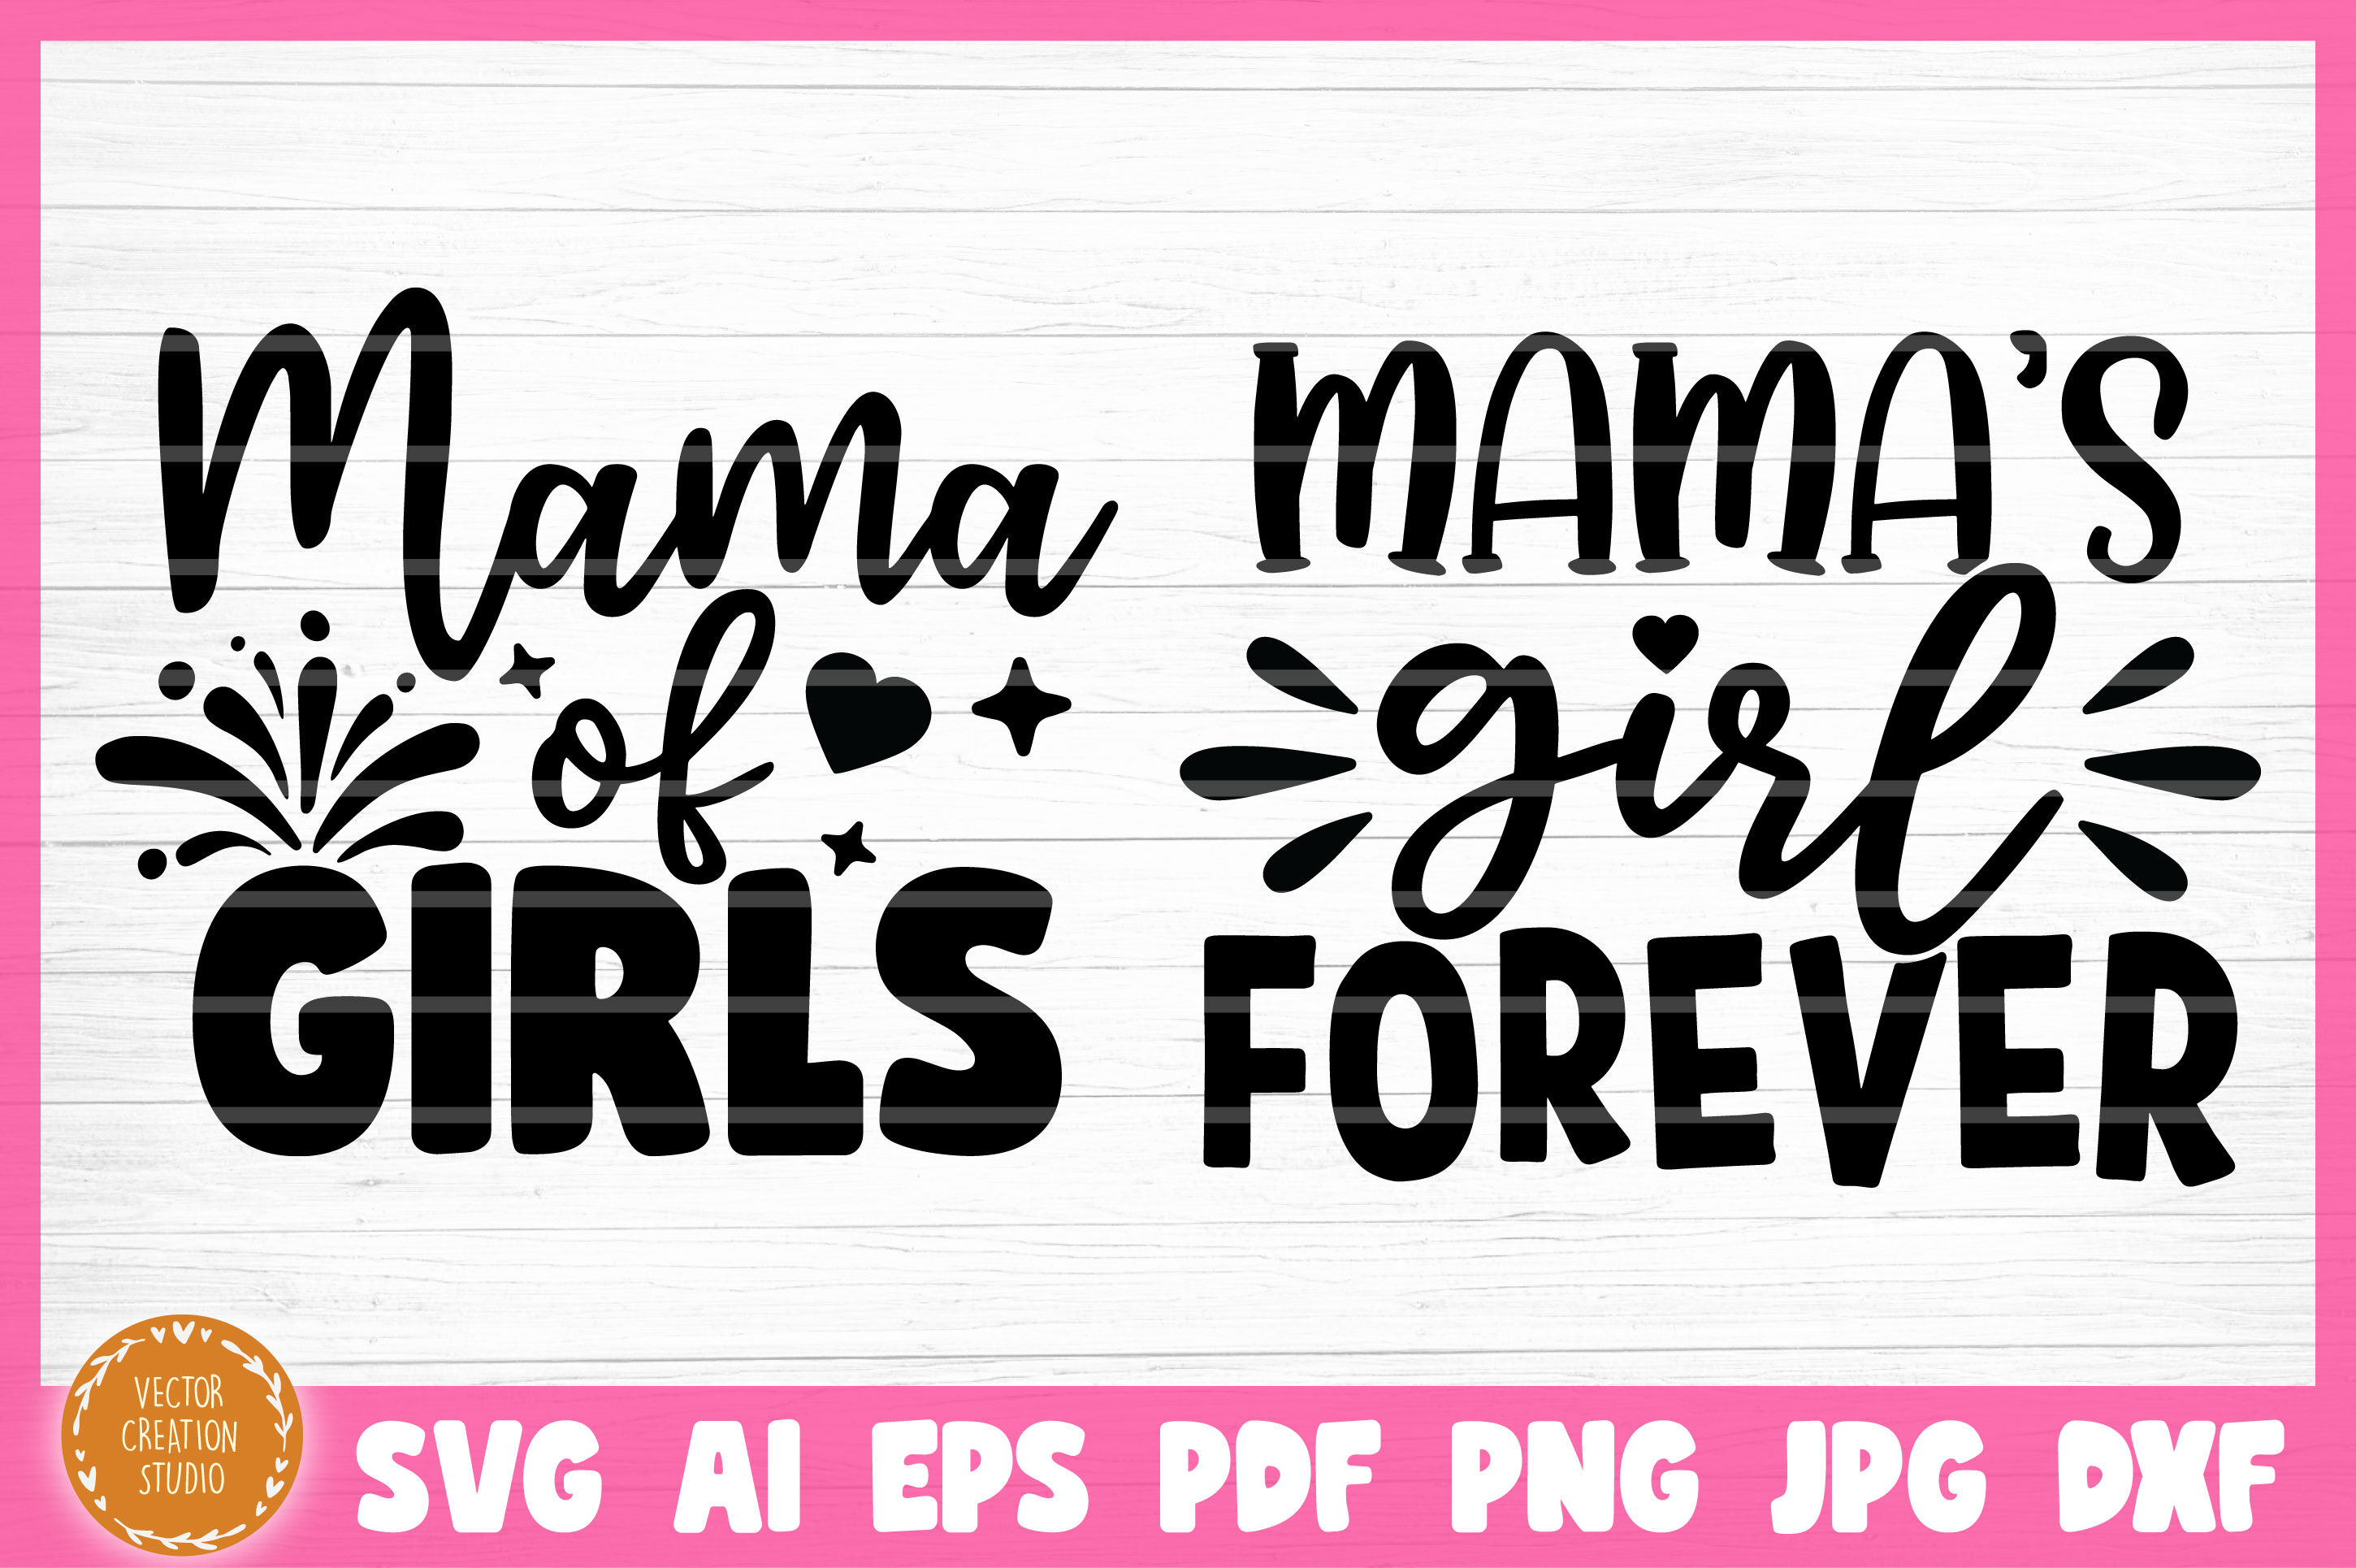 Download Mama Of Girls Mama S Girl Mother Daughter Svg Cut Files By Vectorcreationstudio Thehungryjpeg Com